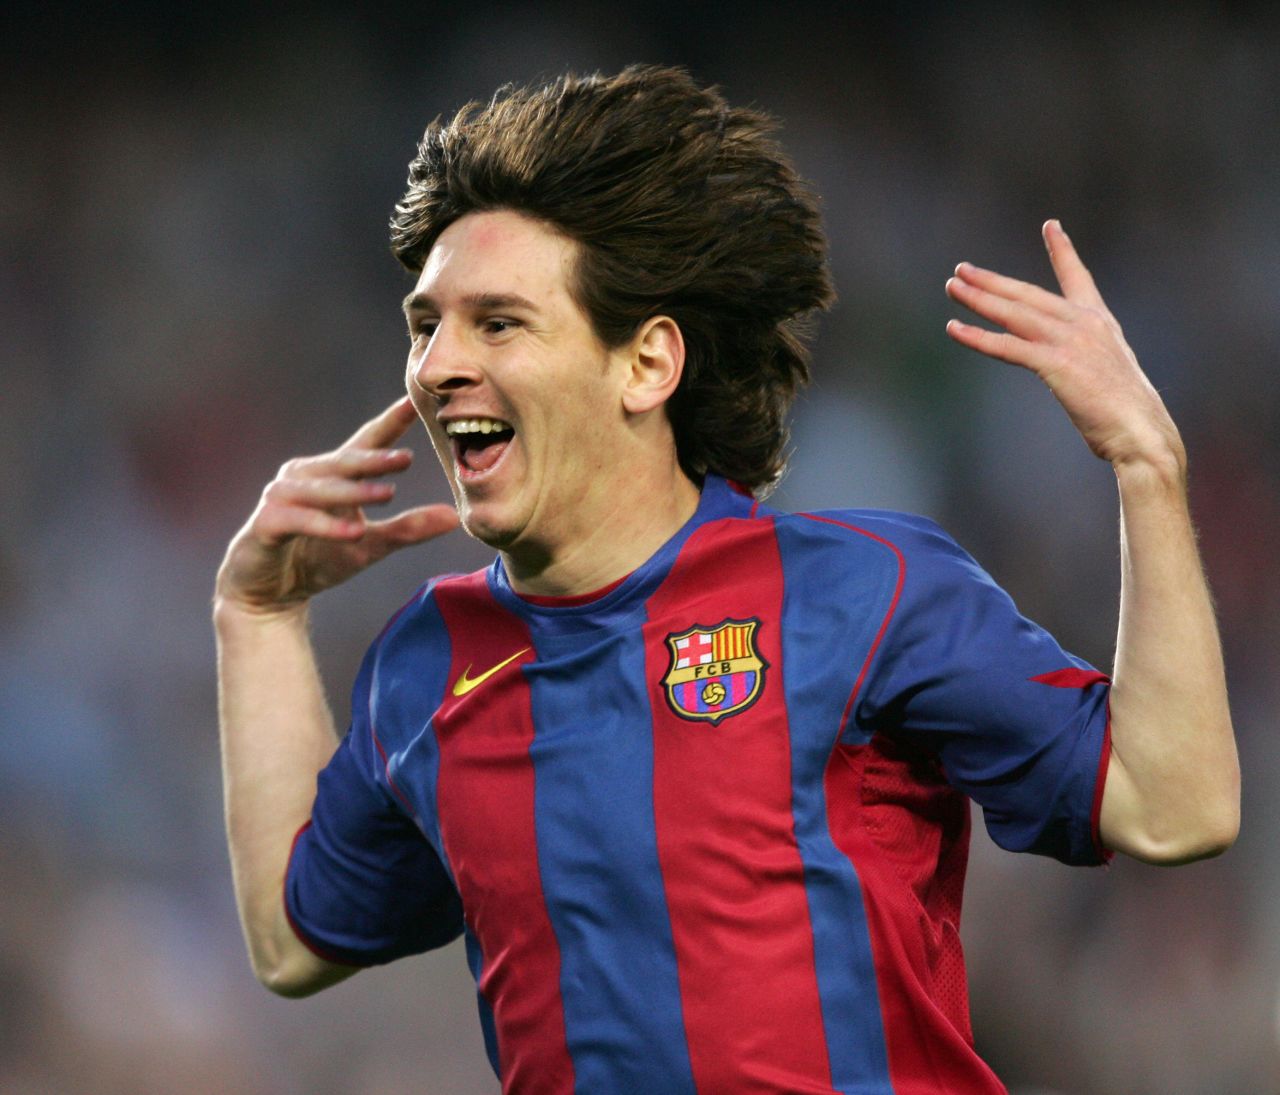 Messi's debut came against Espanyol on October 16, 2004. The 17-year-old came on as a substitute, replacing Portuguese midfielder Deco. The teen sensation would have to wait seven months for his first Barca goal, which came against Albacete on May 1, 2005.